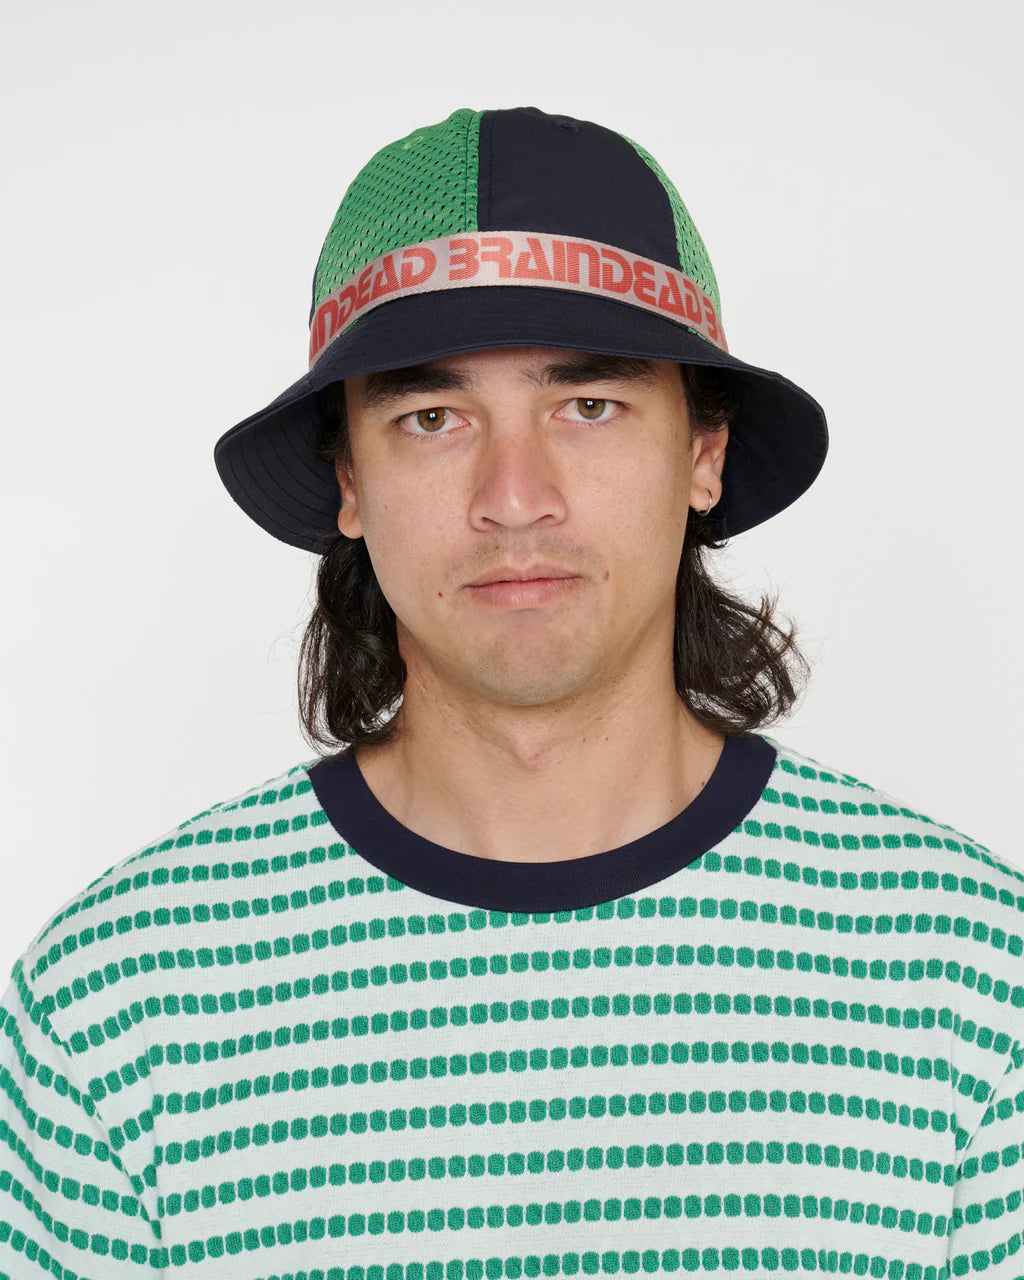 Mesh Digital Camouflage Bucket Hats with Vented Neck Cover